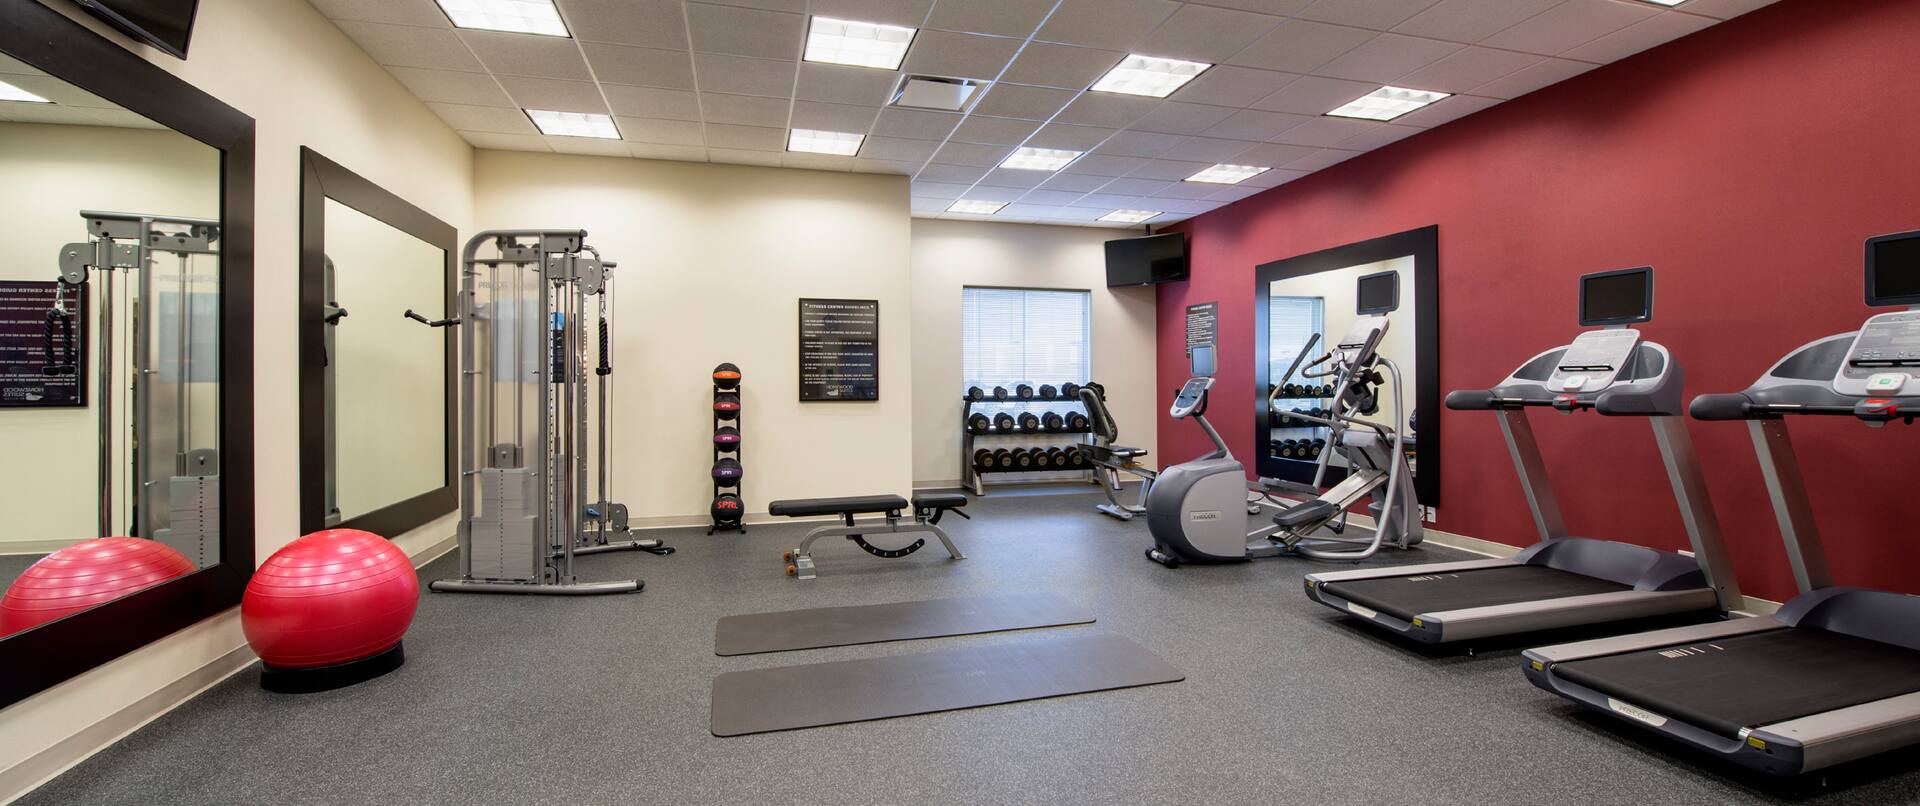  Fitness Center With Cardio Equipment, TV Above Large Mirrors, Red Exercise Ball, Weight Machine, Weight Balls, Weight  Bench, and TV Above Free Weights